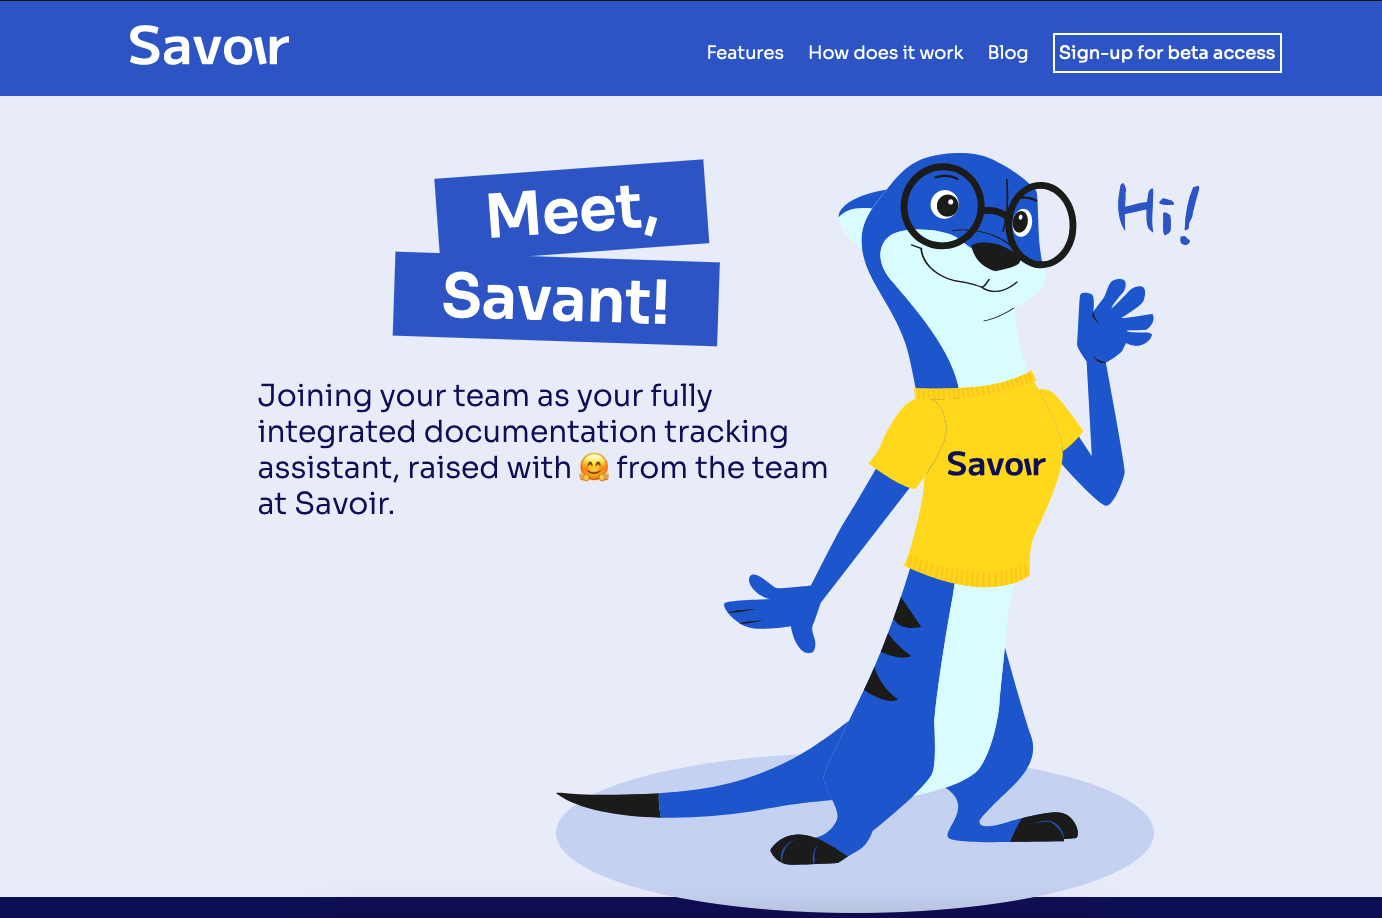 View of the Savoir website, with the navbar visible, the meet savant message, and Savant the blue suricate waving.